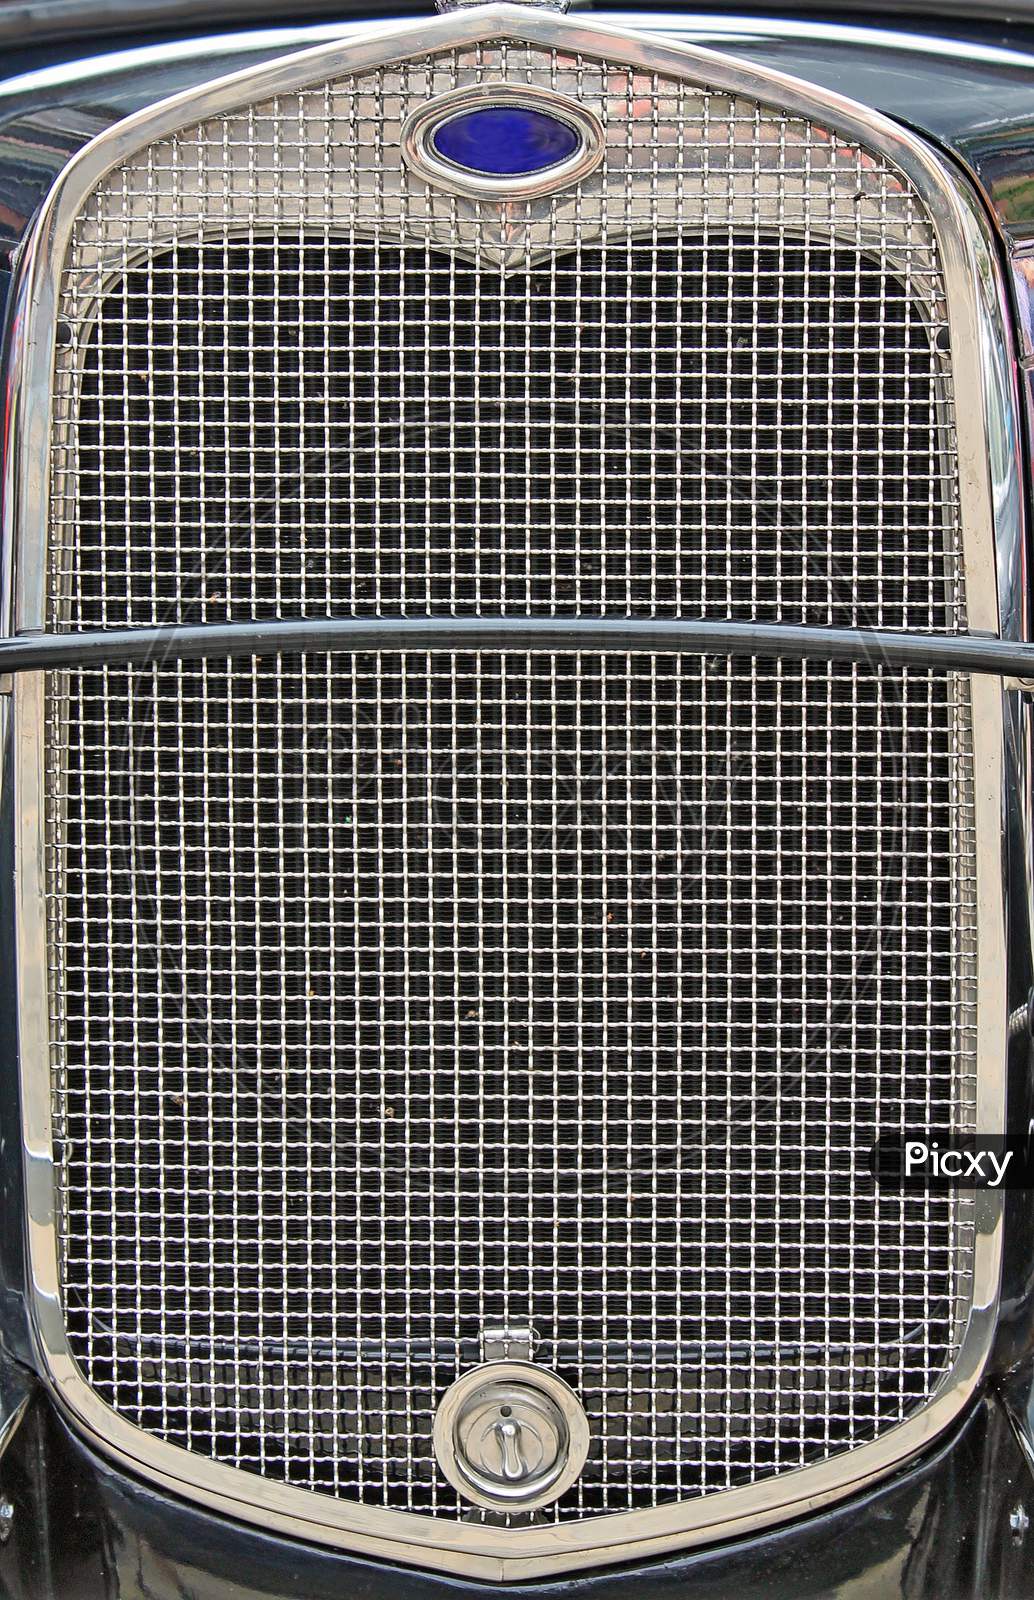 Radiator grill of an old car